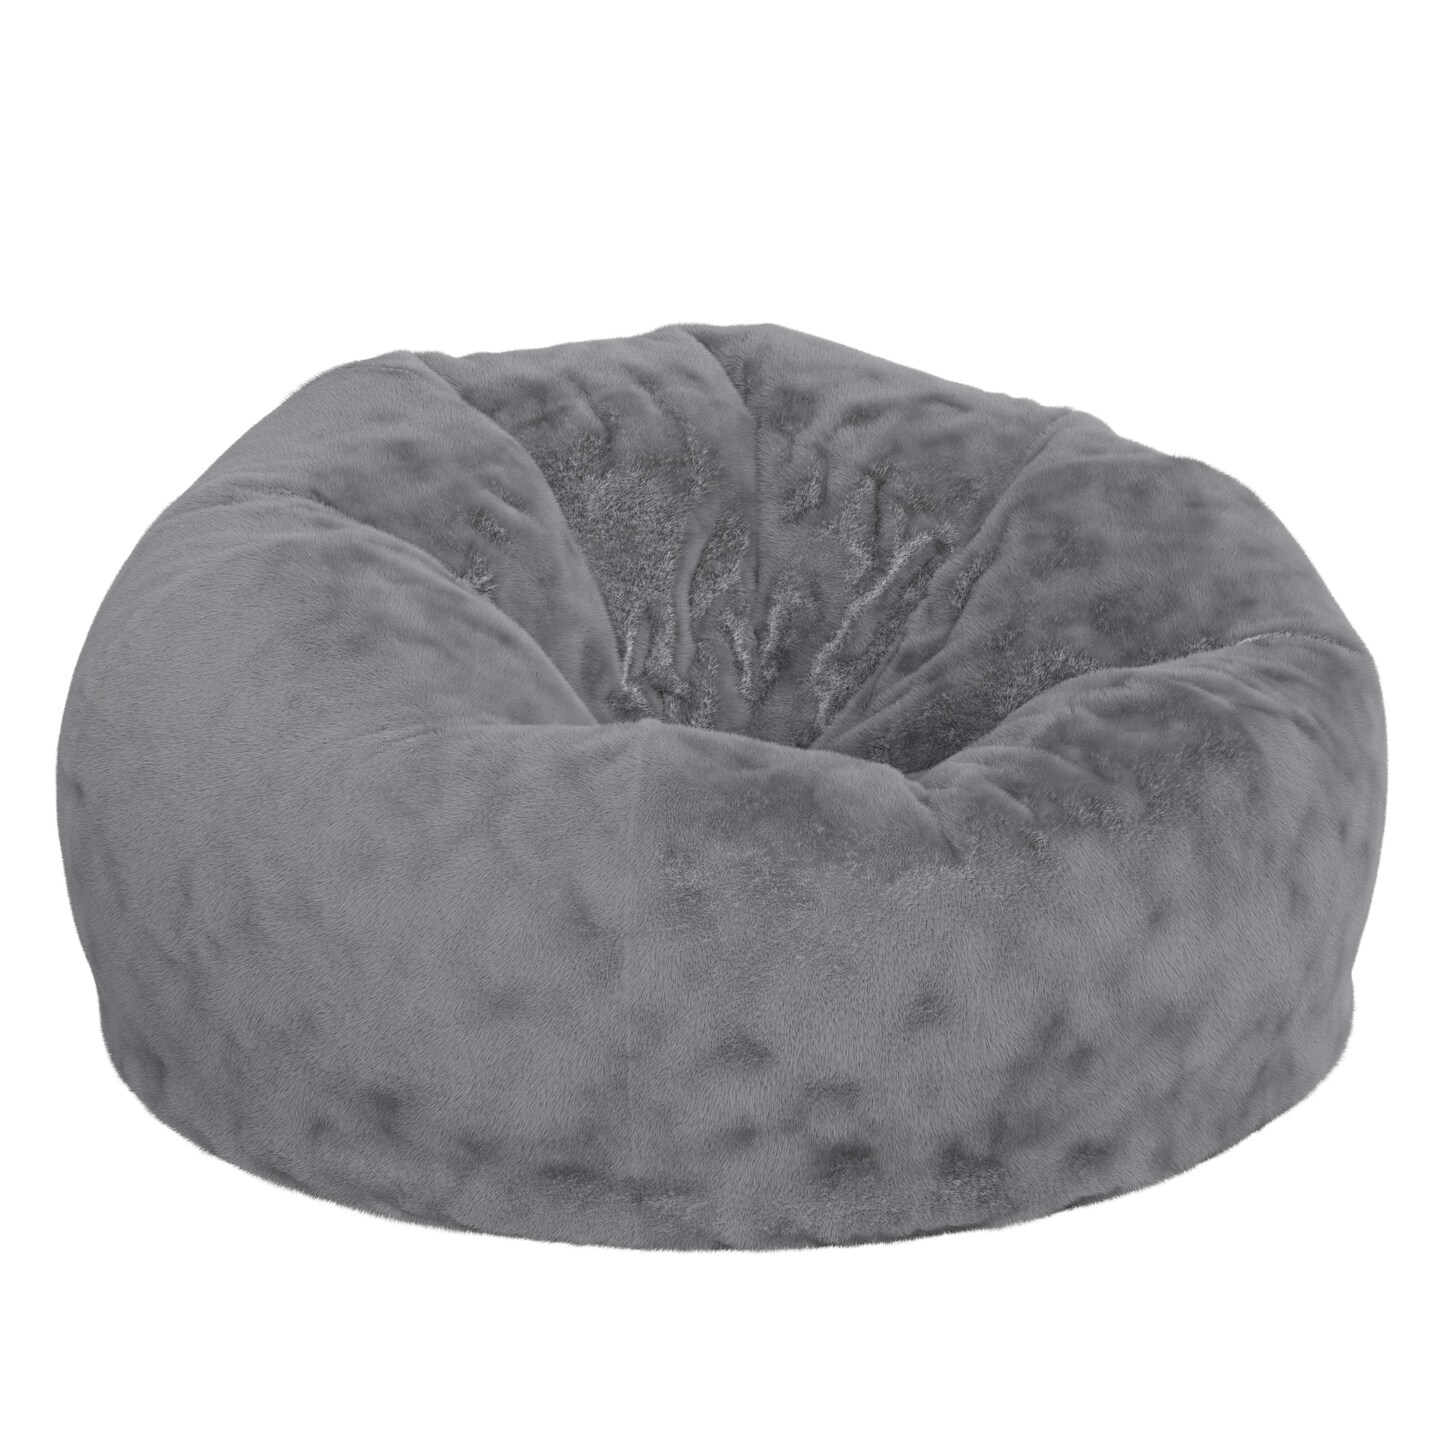 Emma and Oliver Oversized Bean Bag Chair for Kids and Adults